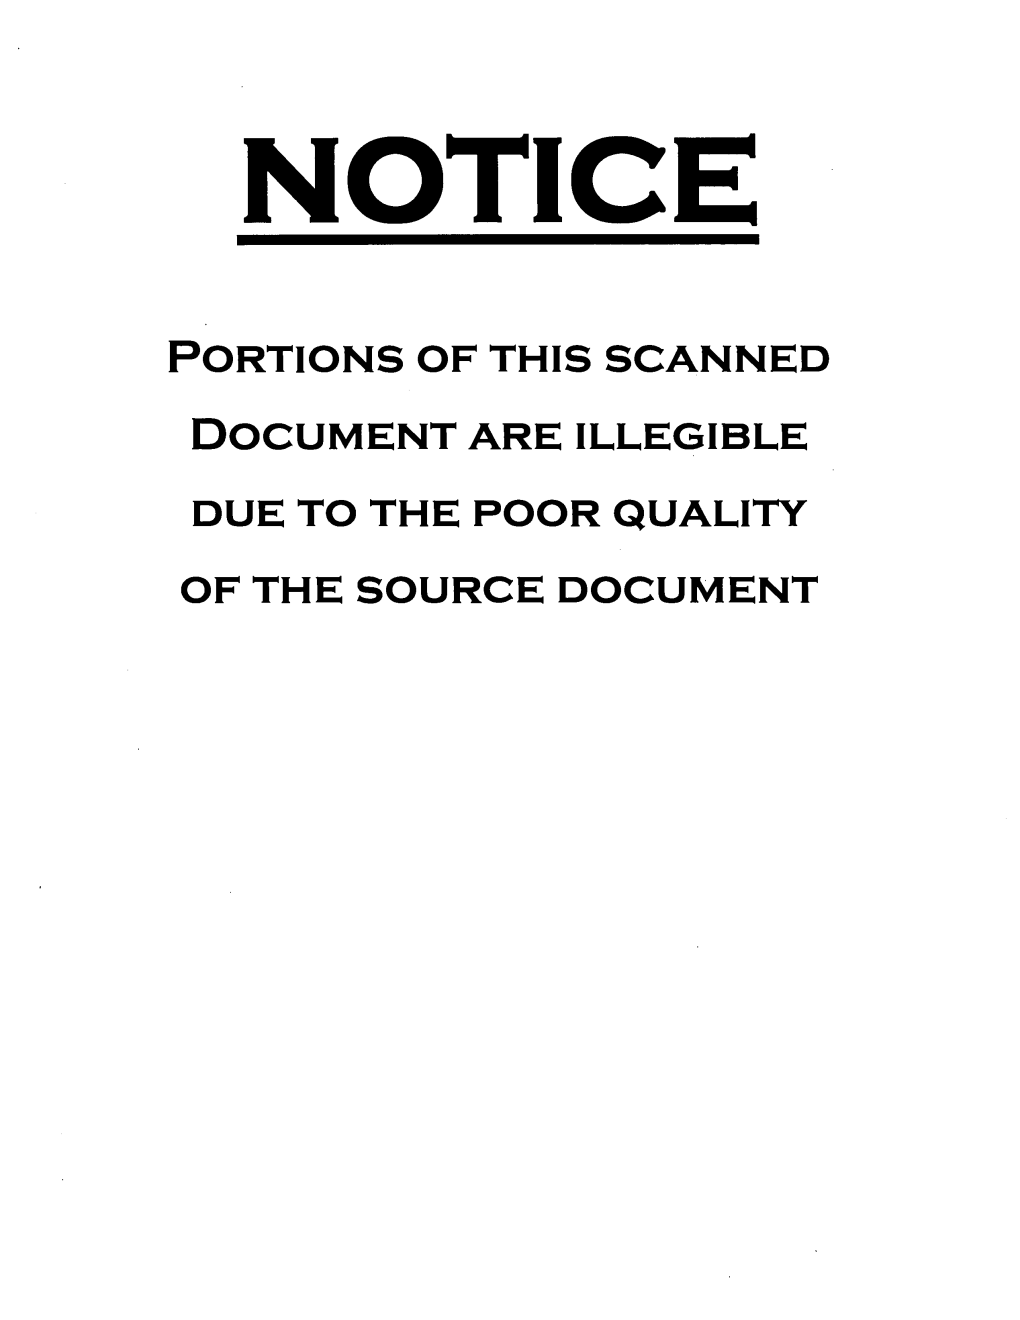 Portions of This Scanned Document Are Illegible Due